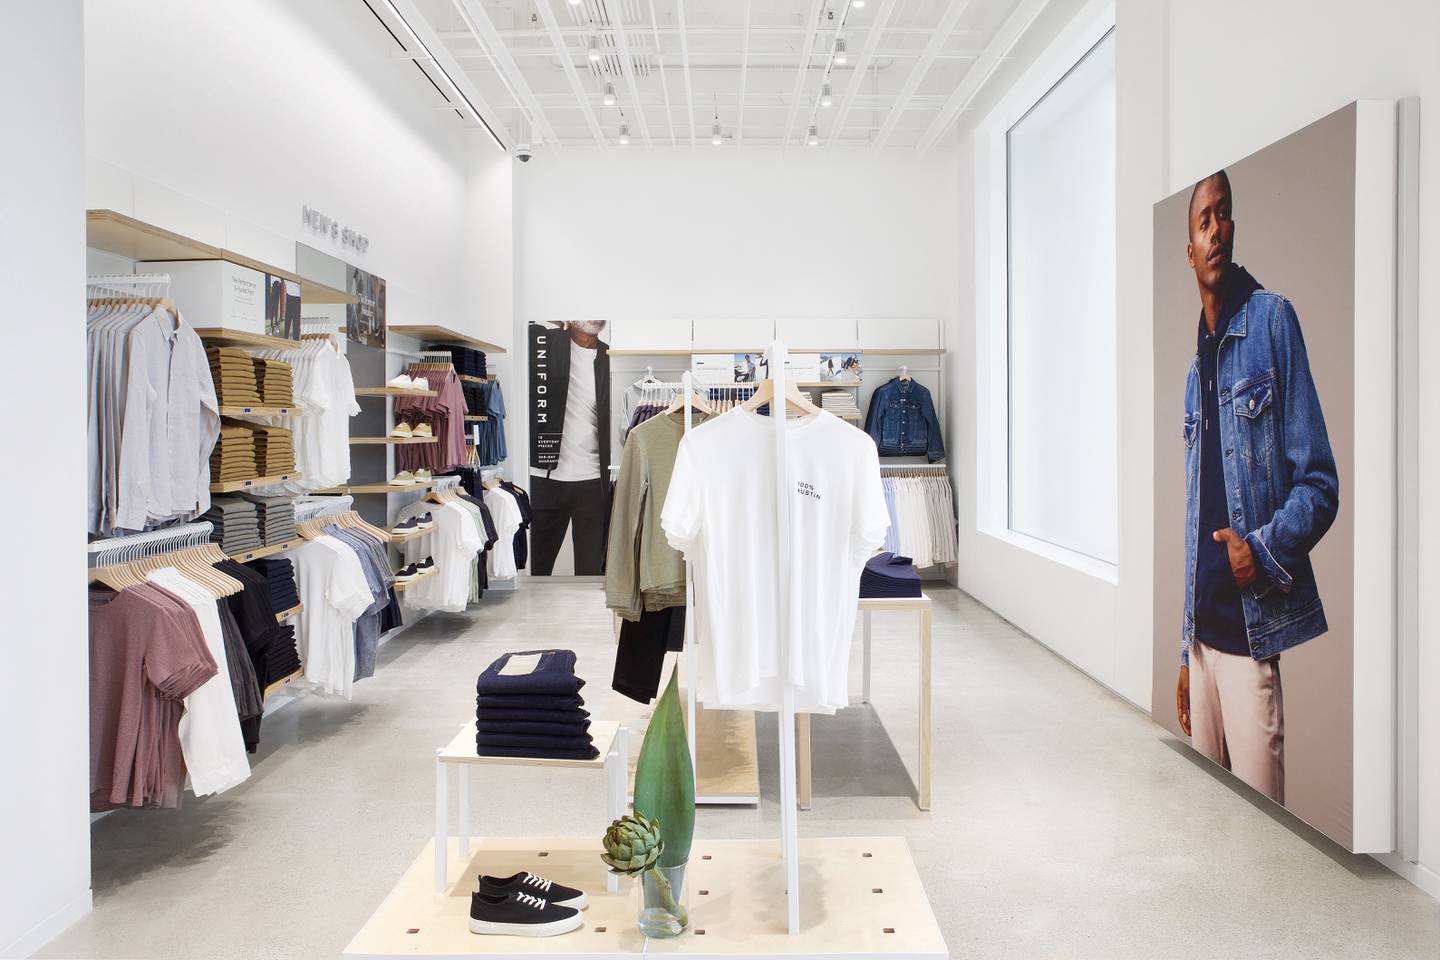 Everlane's Austin store opened in 2020. The company is planning to open 2 to 3 more stores this year. Jenna Stokes for Everlane.